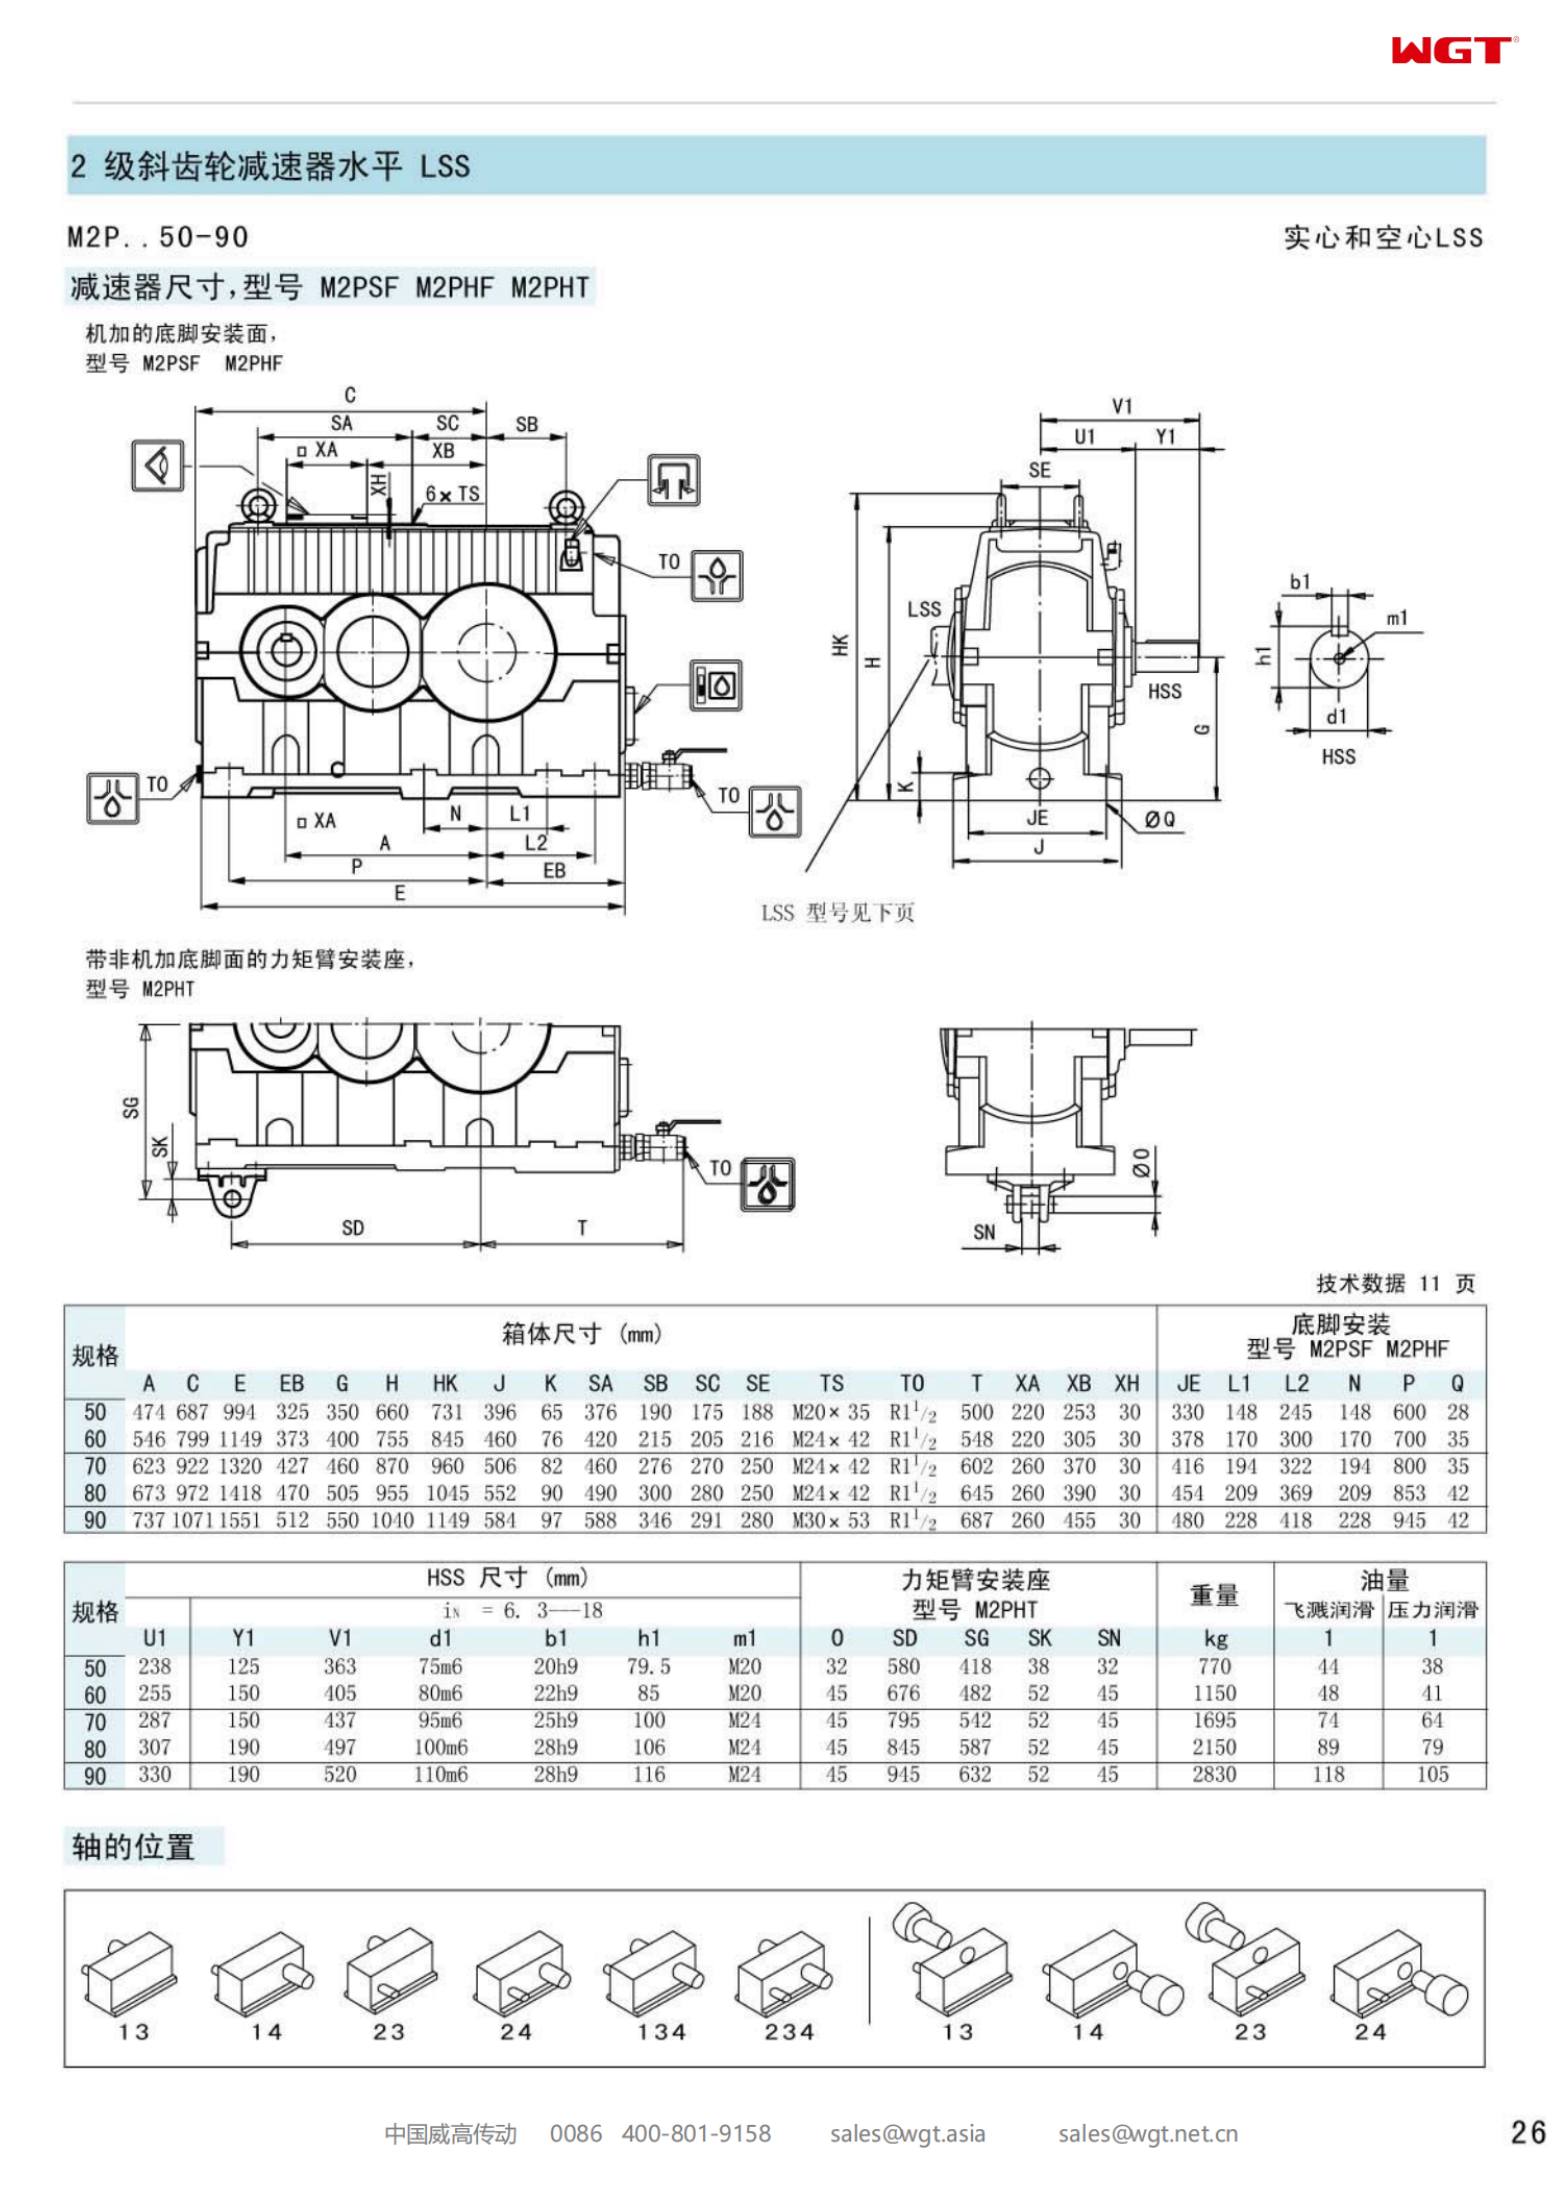 M2PHF70 Replace_SEW_M_Series Gearbox